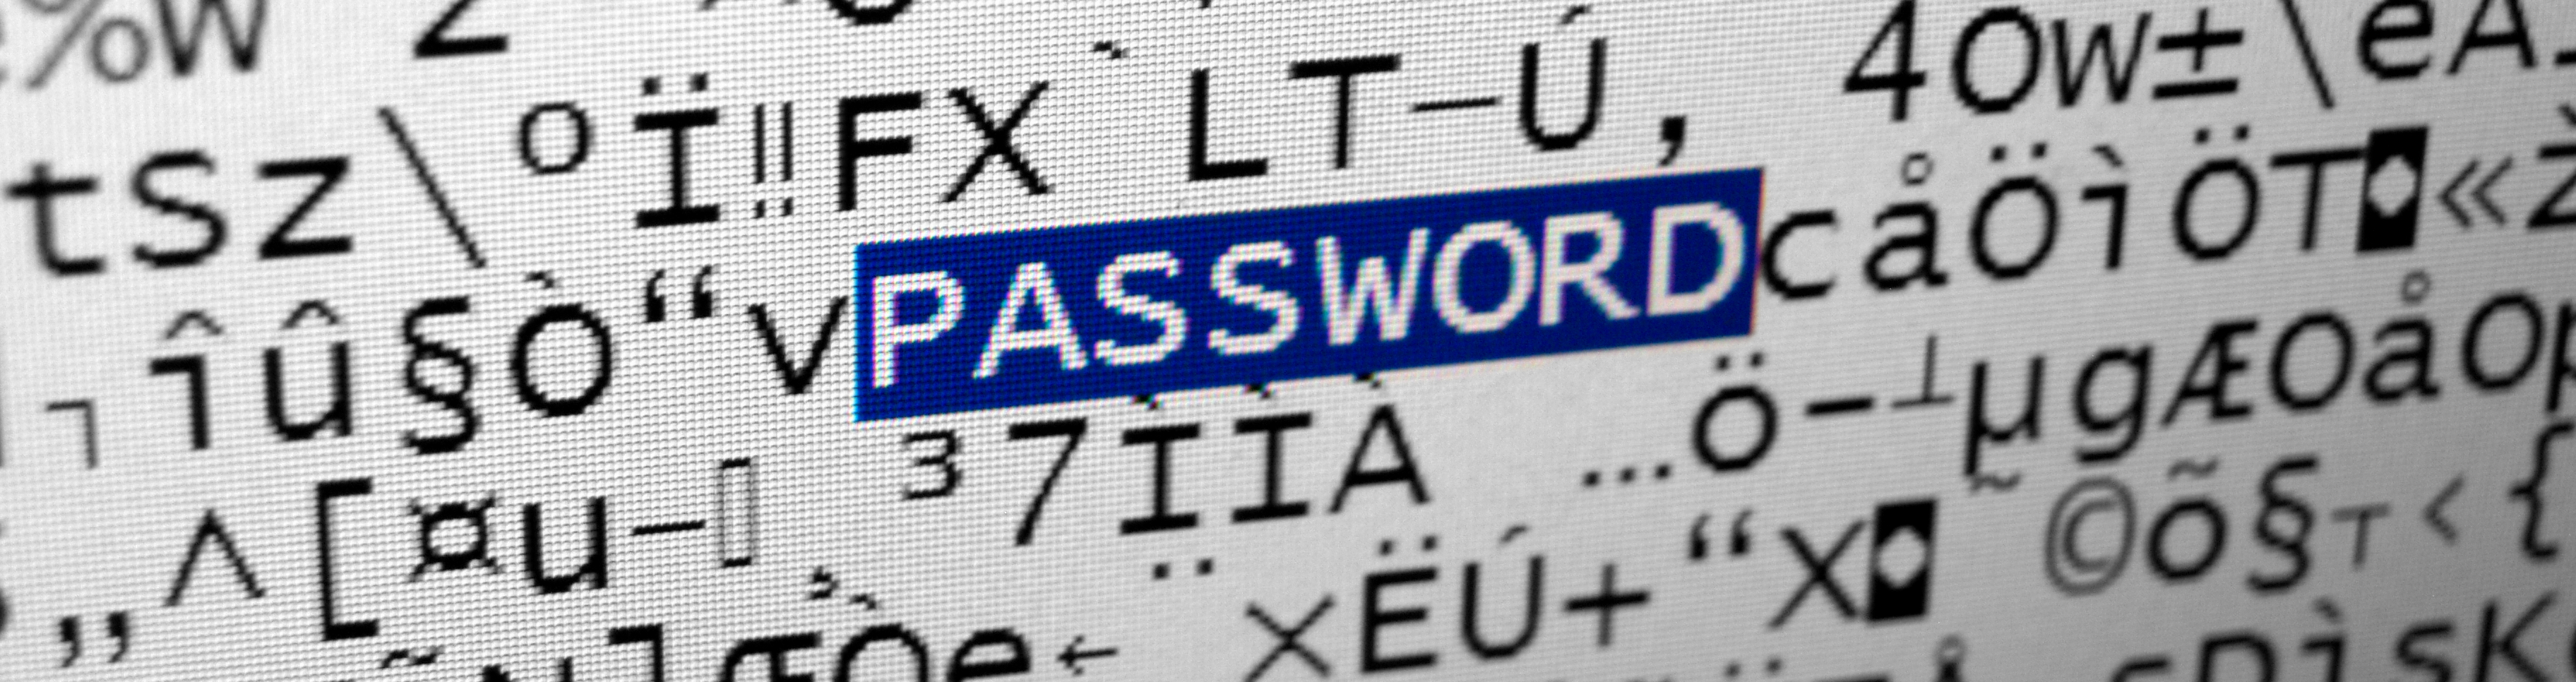 Passwords are not enough